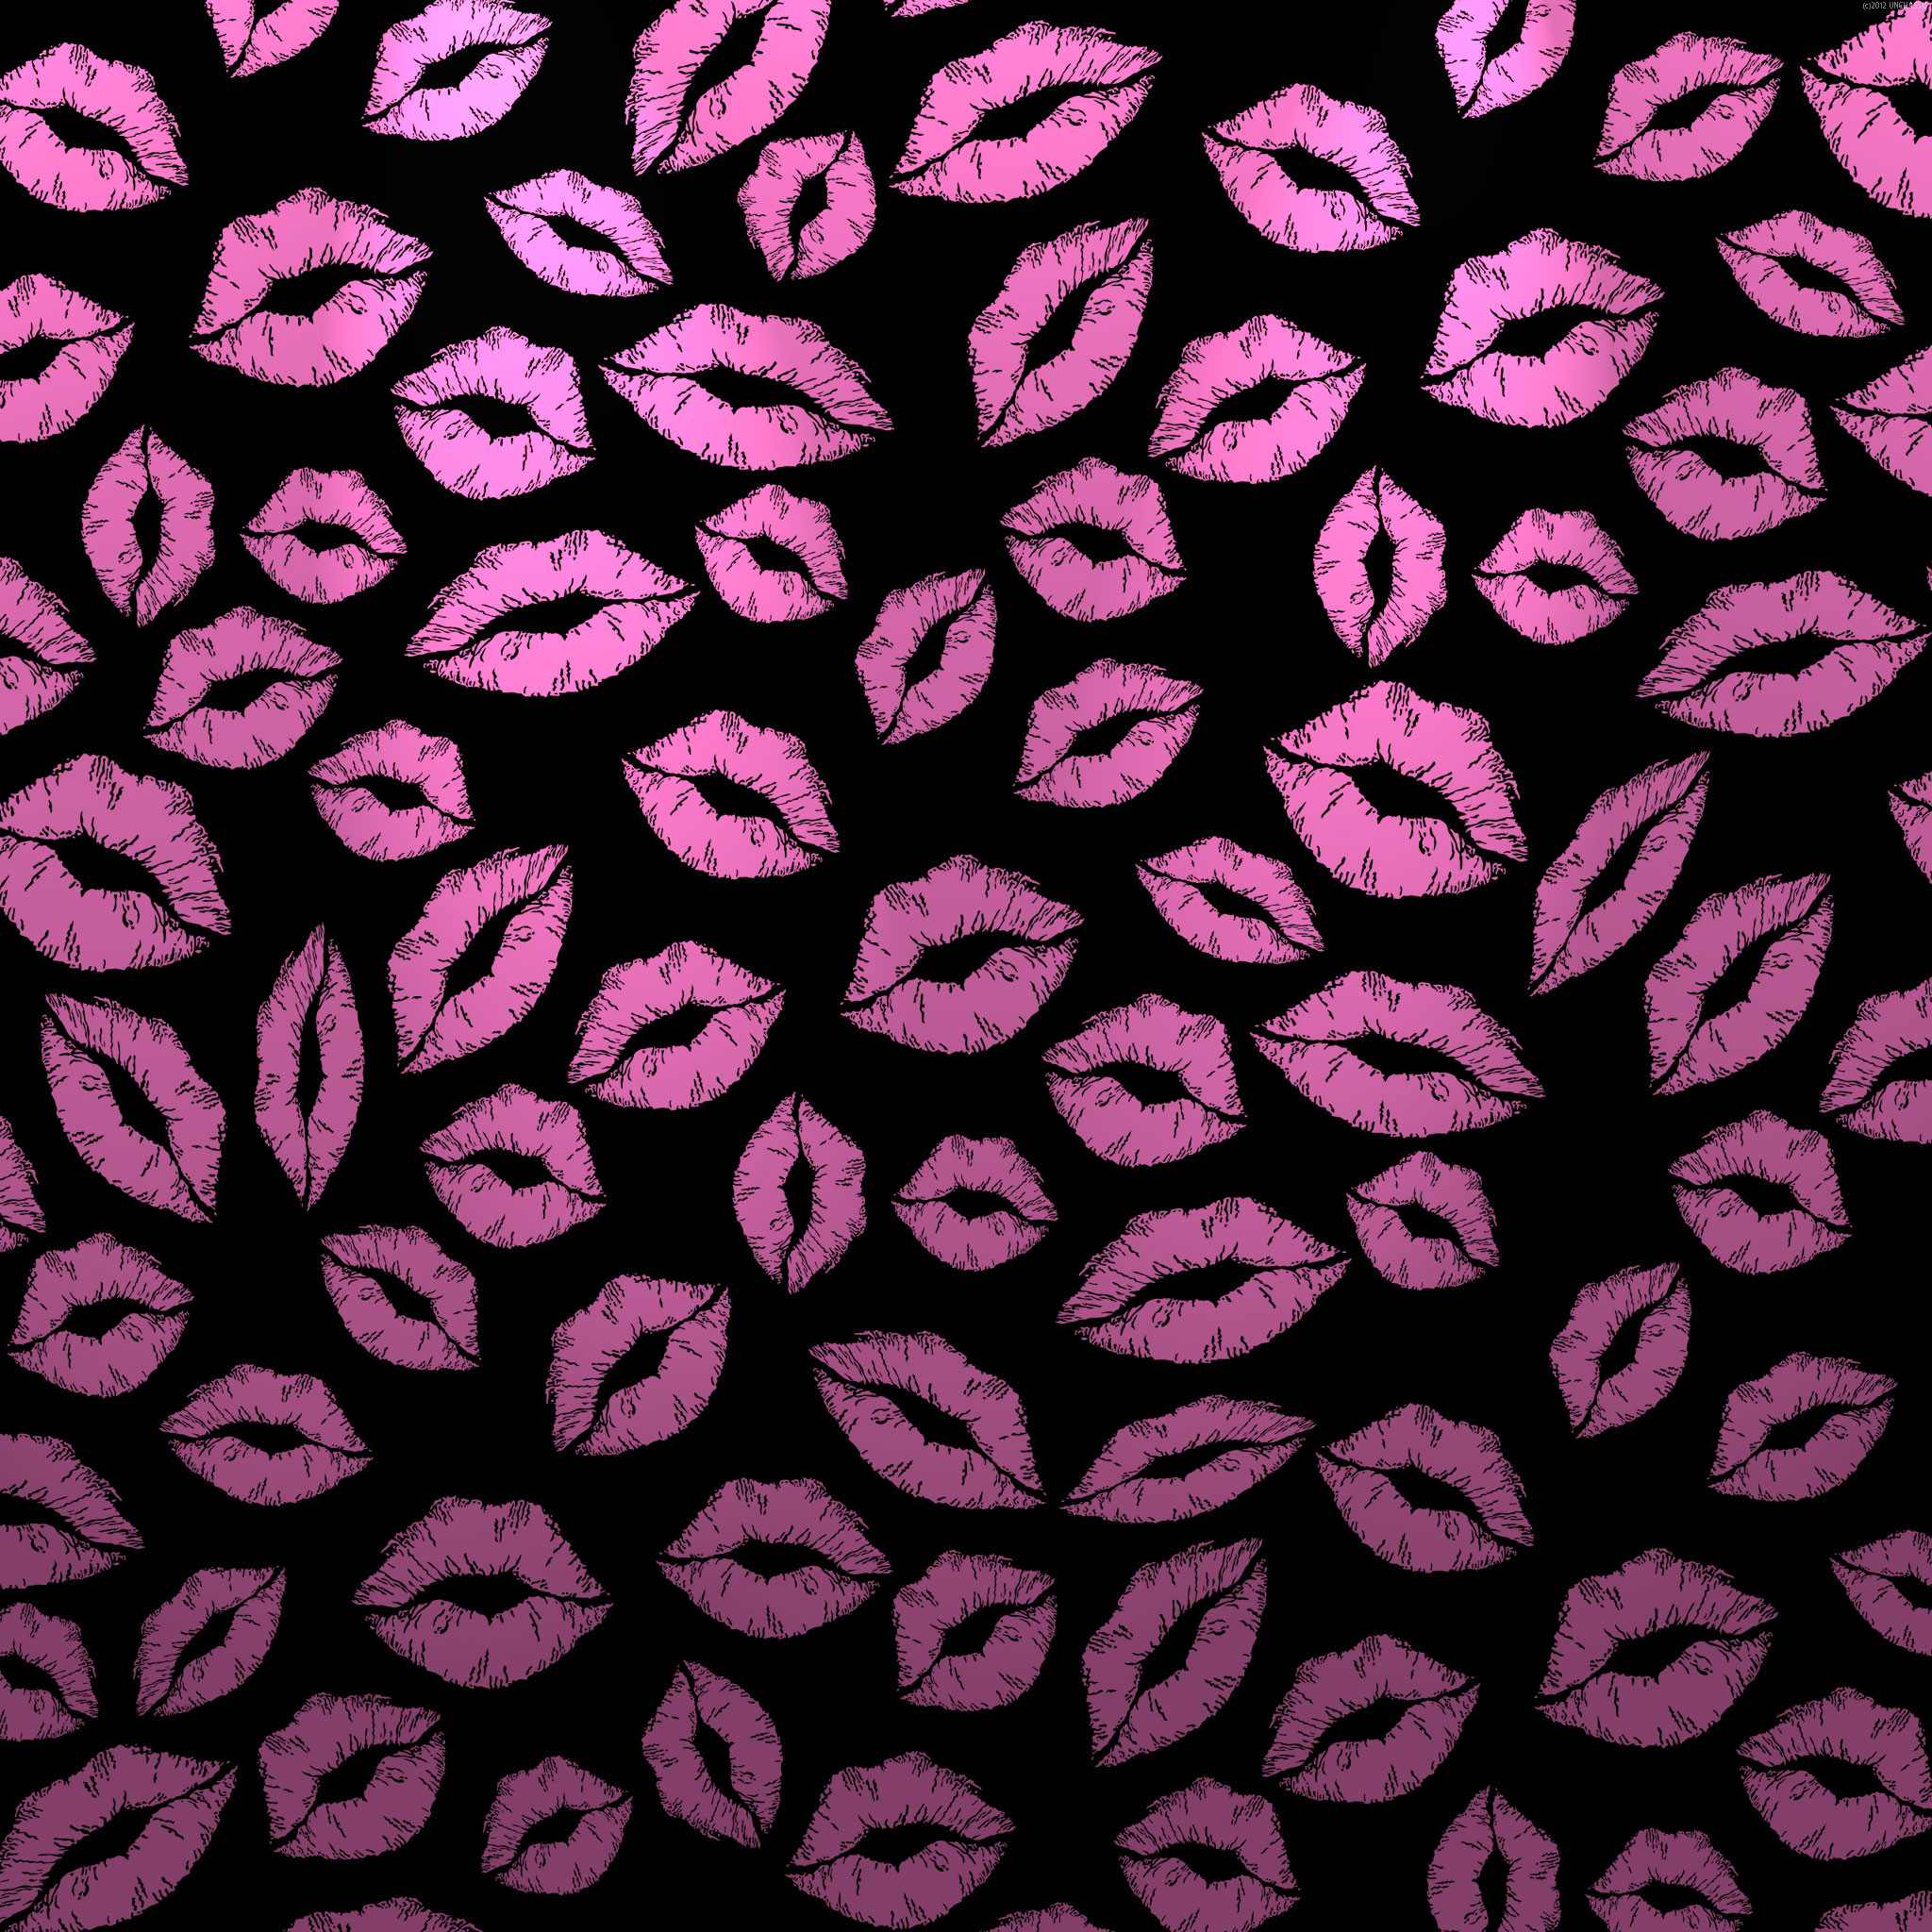 2048x2048 Pink and Black Wallpaper Backgrounds